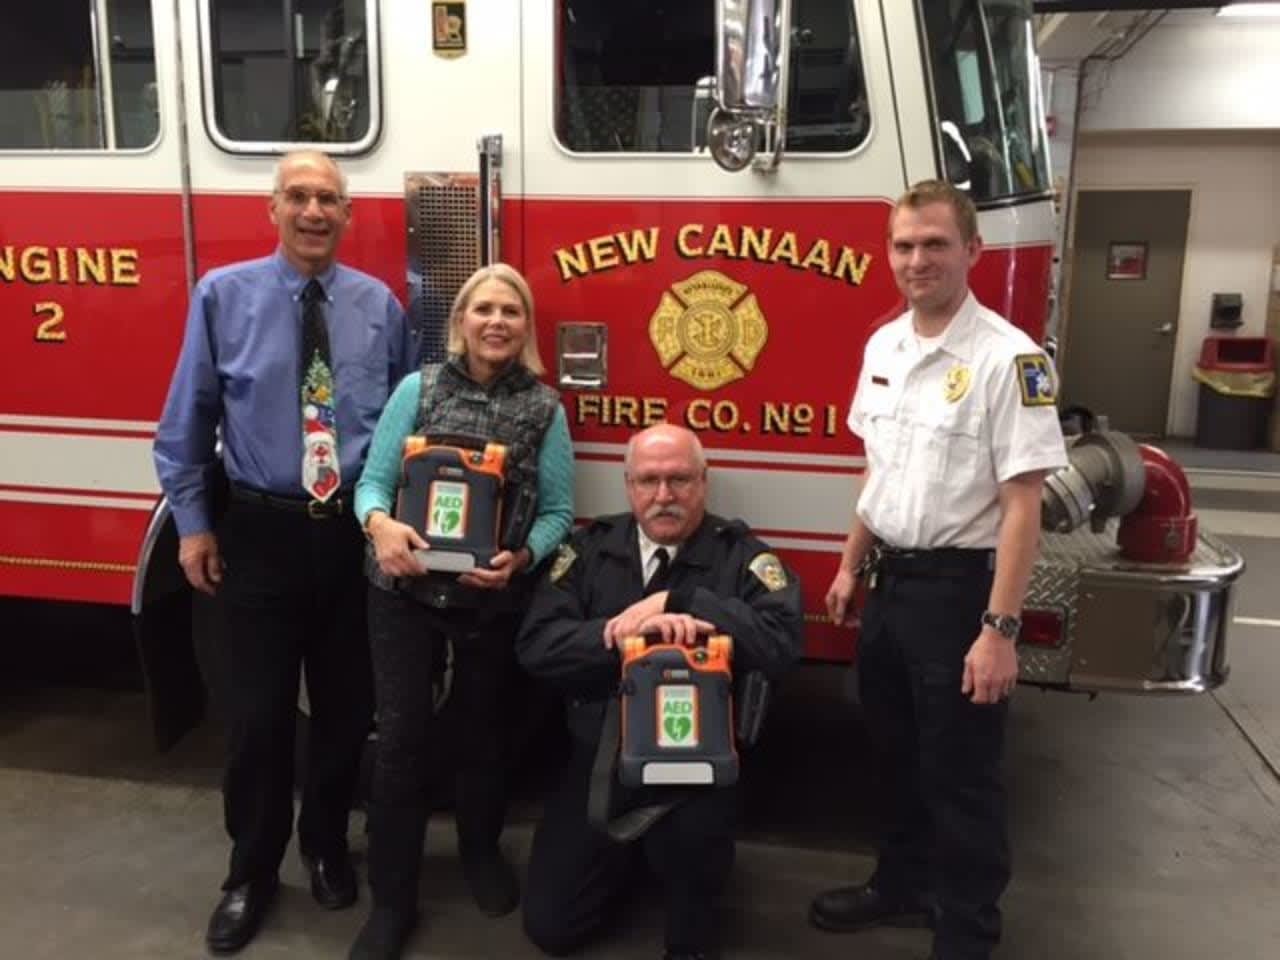 Norwalk Hospital recently donated two automated external defibrillators (AEDs) to the New Canaan Fire Department and one to St. Aloysius Church in New Canaan.